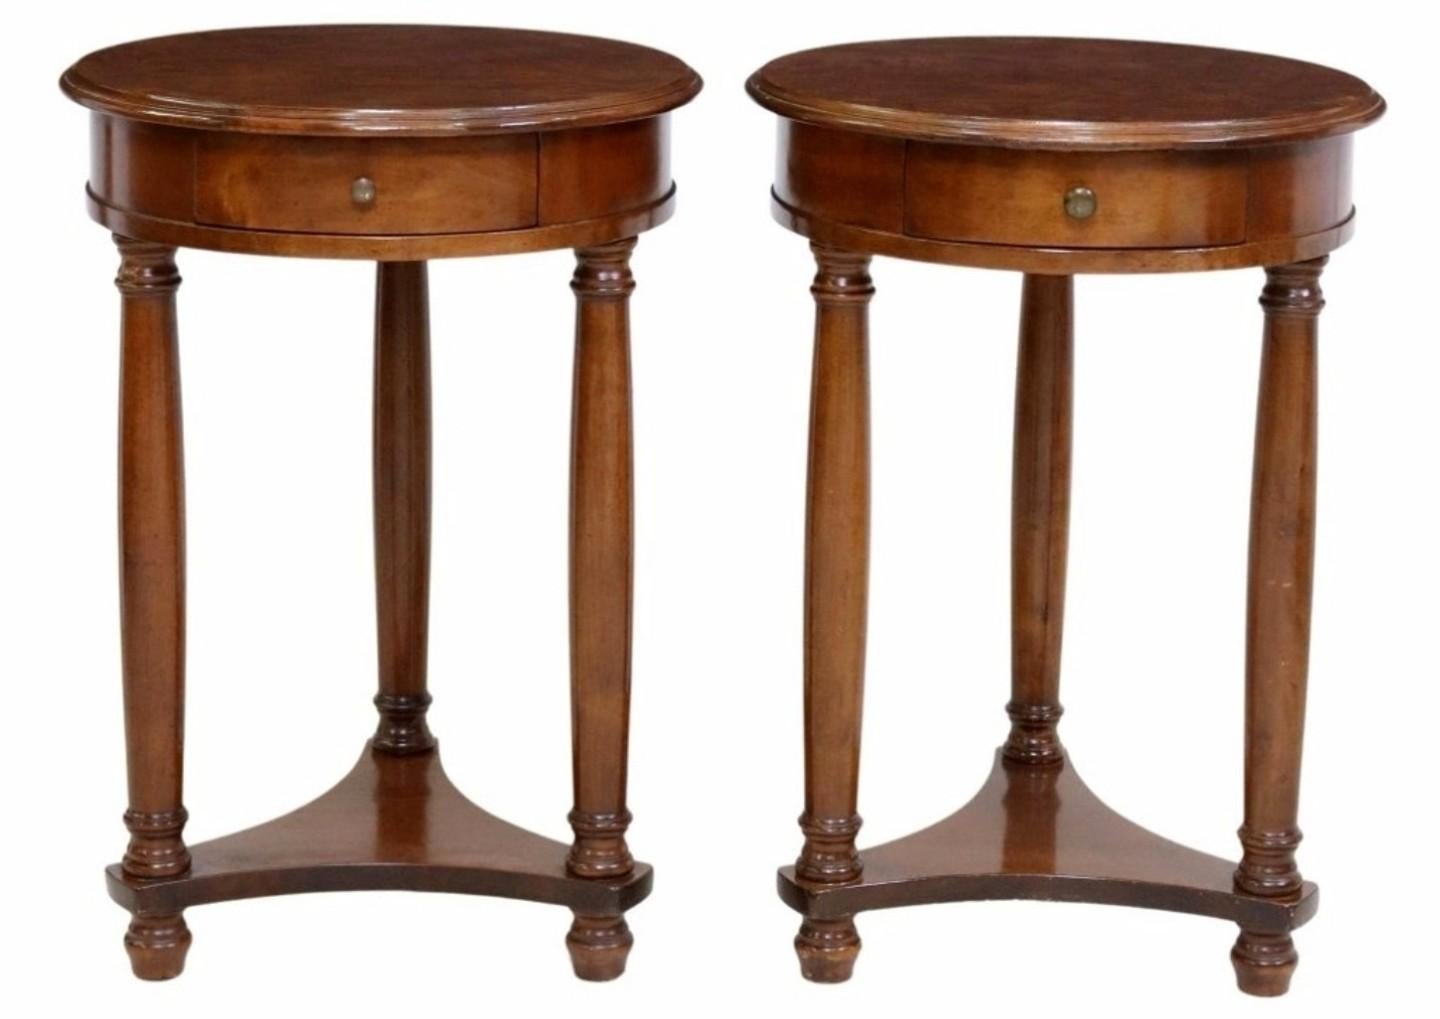 Pair of French Empire Style Burlwood Guéridon Tables  In Good Condition For Sale In Forney, TX